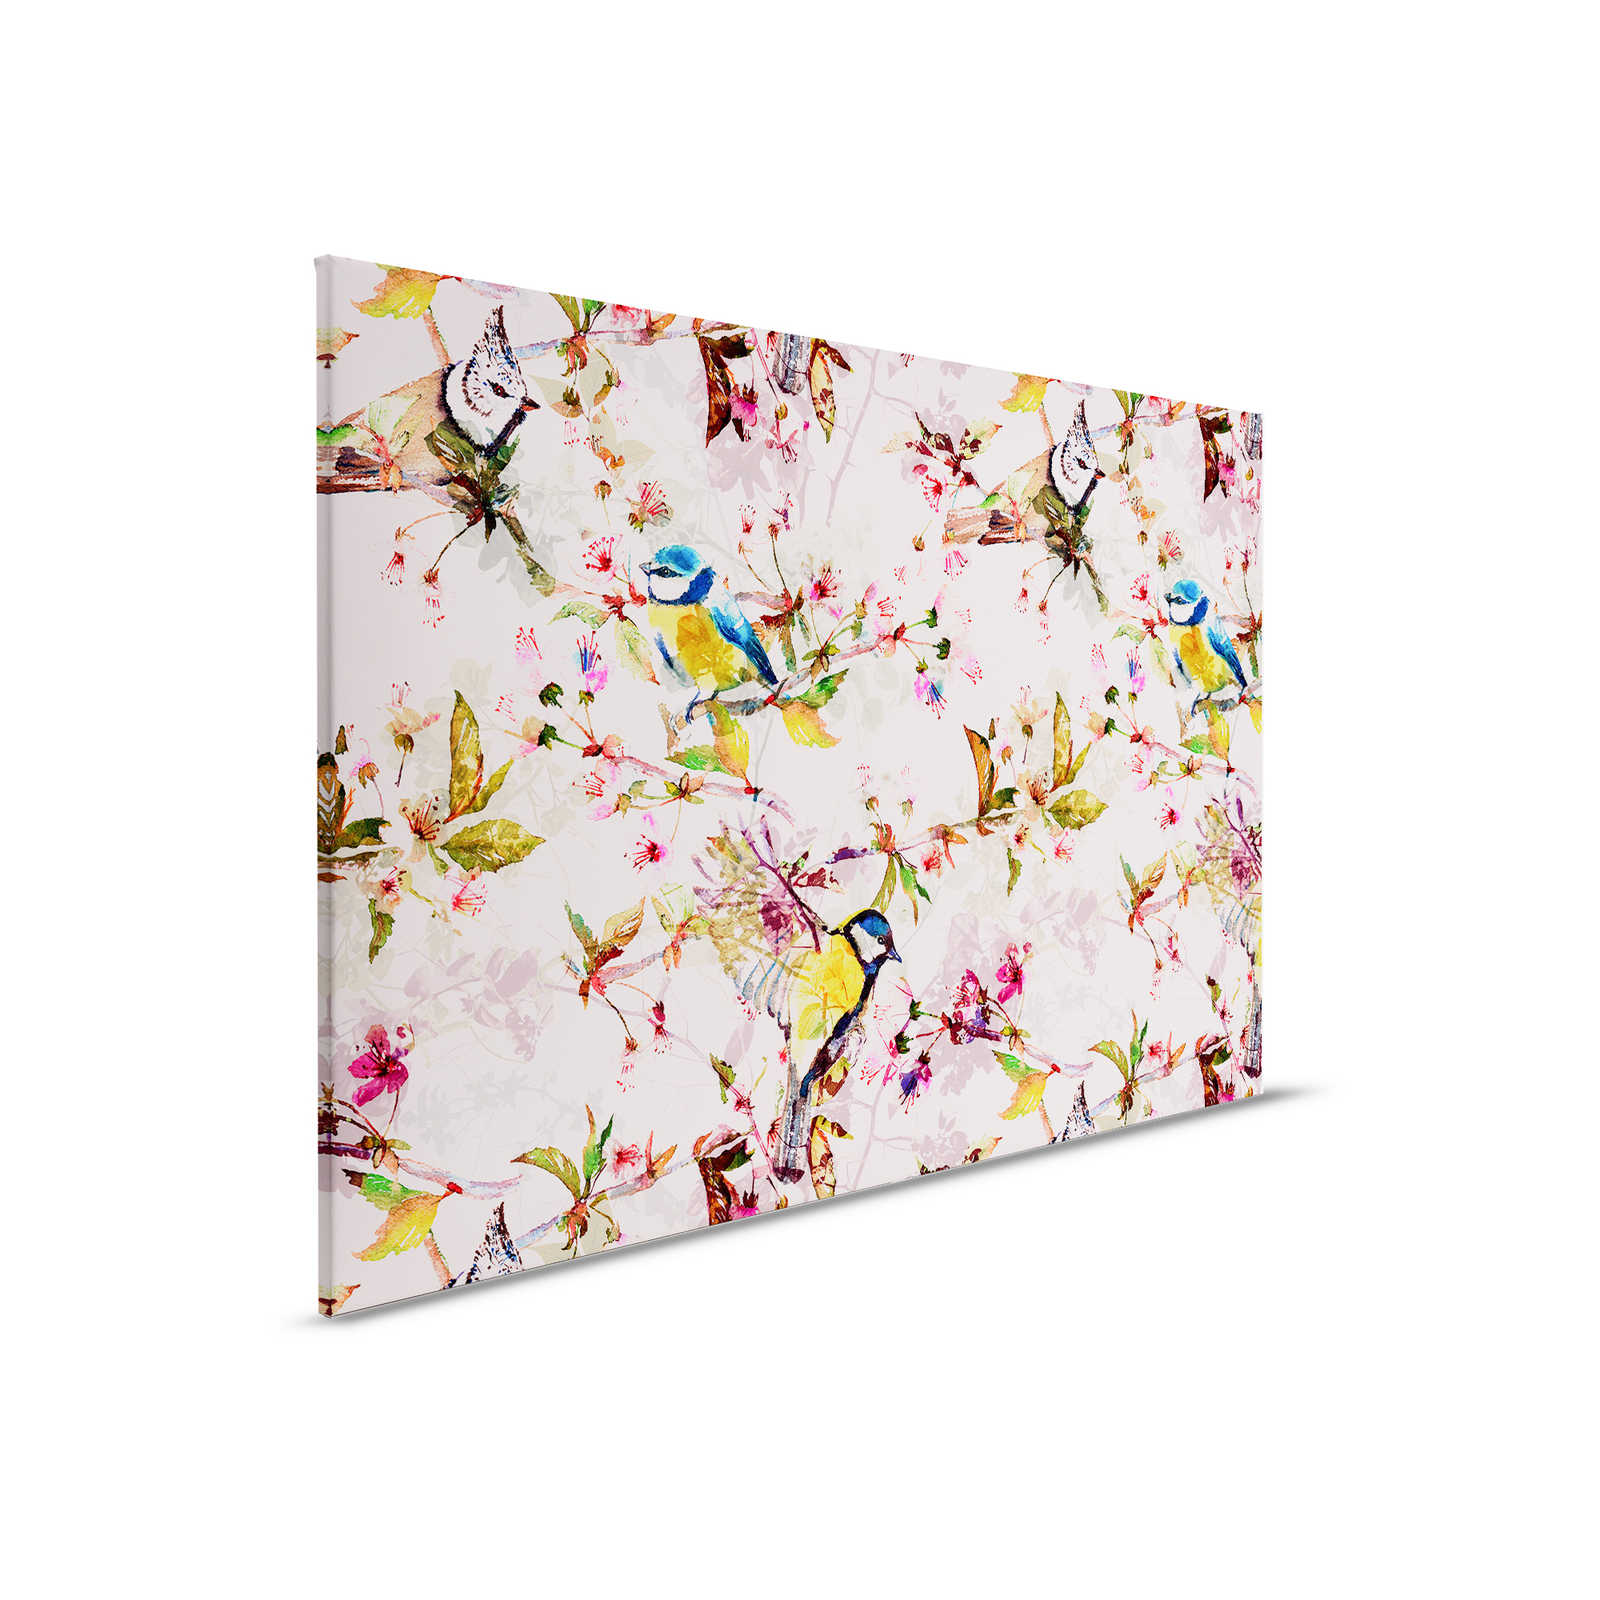         Birds Collage Style Canvas Painting - 0.90 m x 0.60 m
    